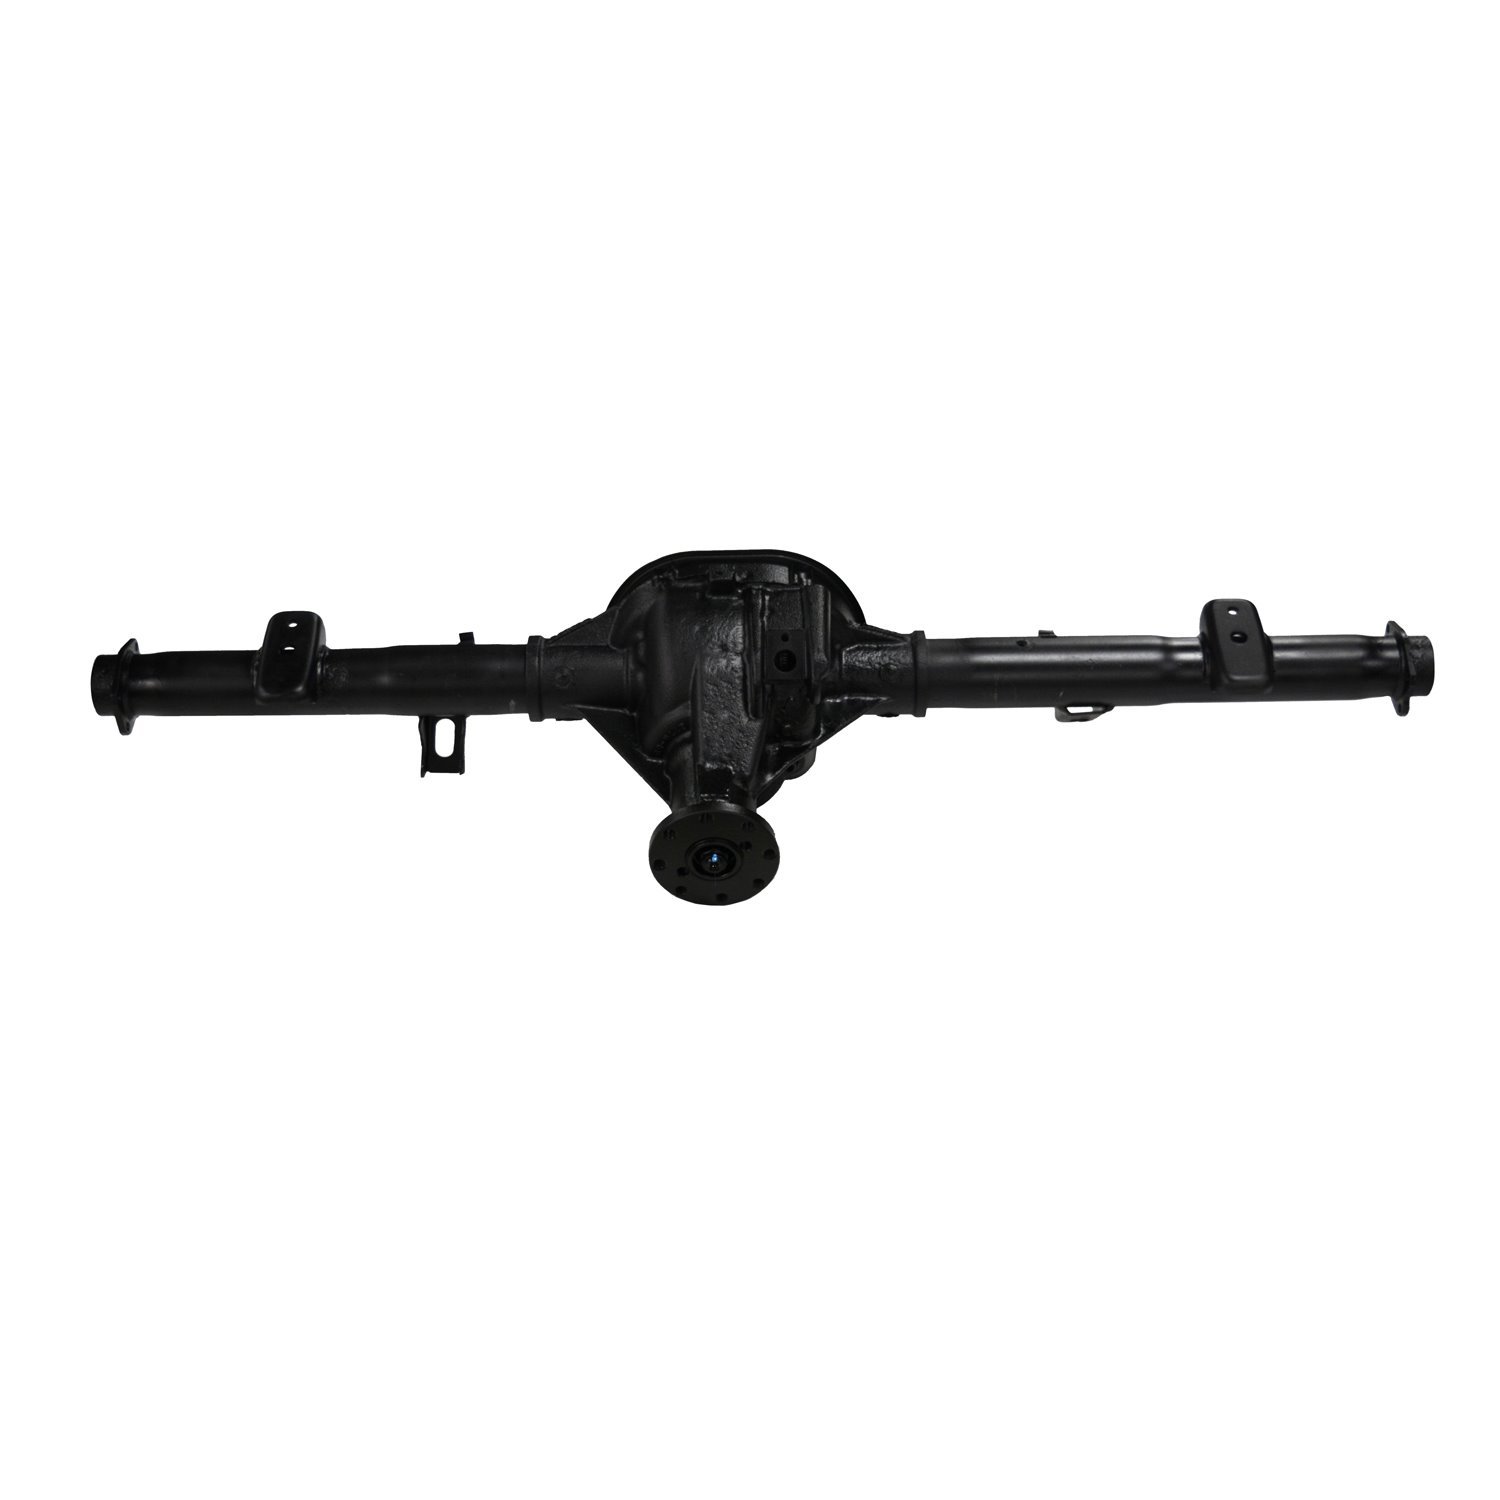 Remanufactured Complete Axle Assembly for 7.5" 99-05 Ranger 3.73 , 10" Drum Brakes